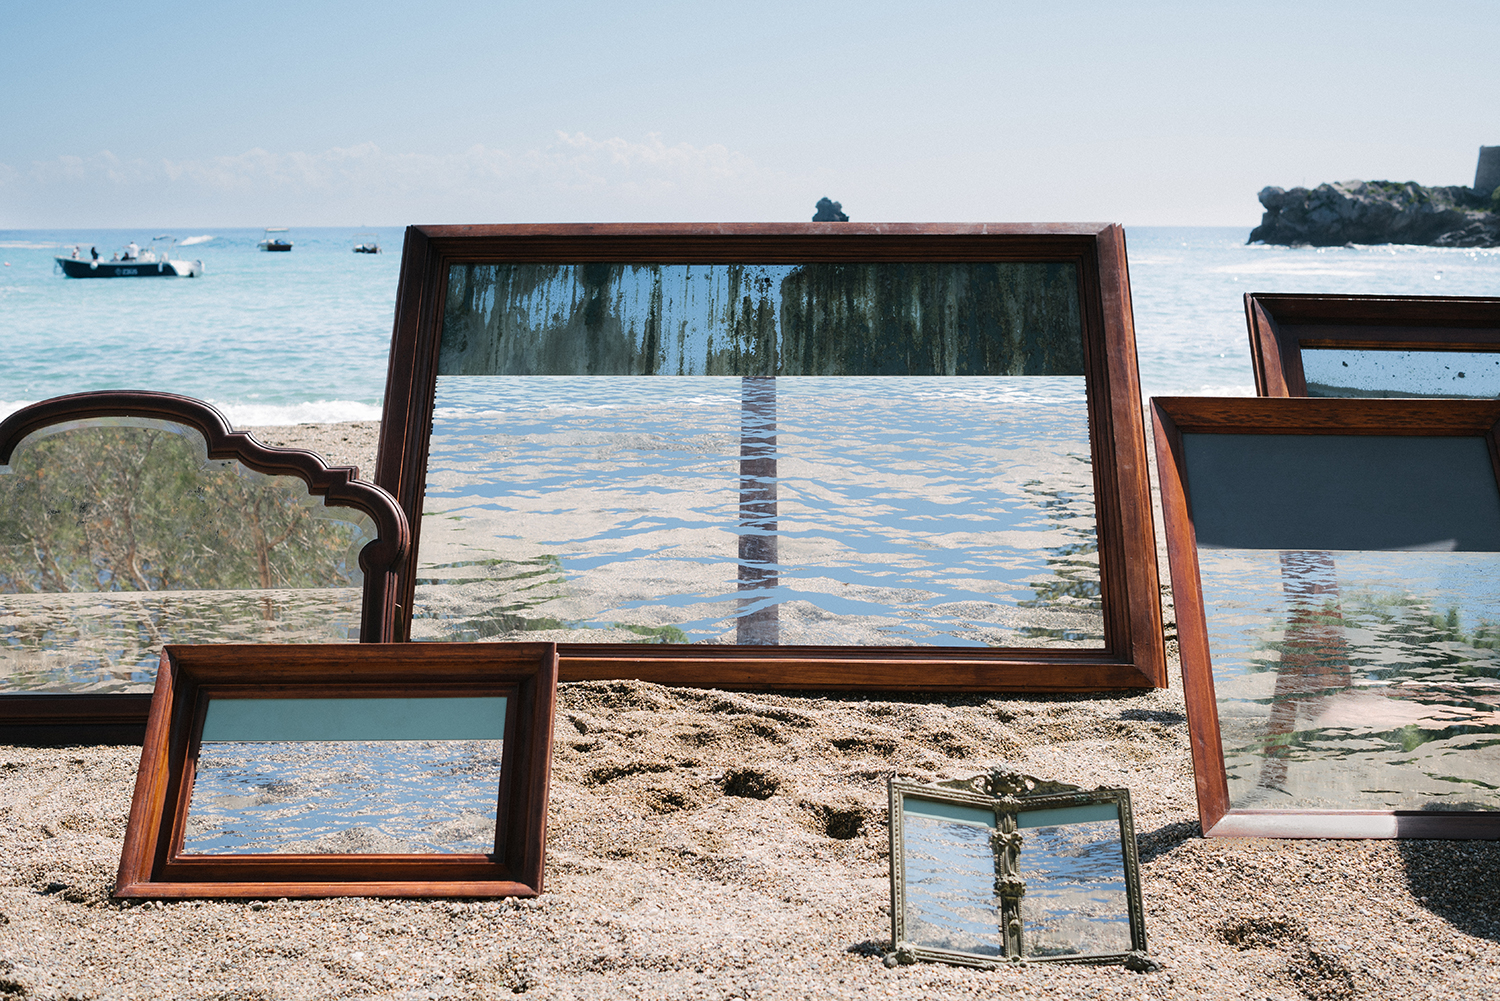 Discover Belmond's Latest Art Installations at Hotels in Mallorca